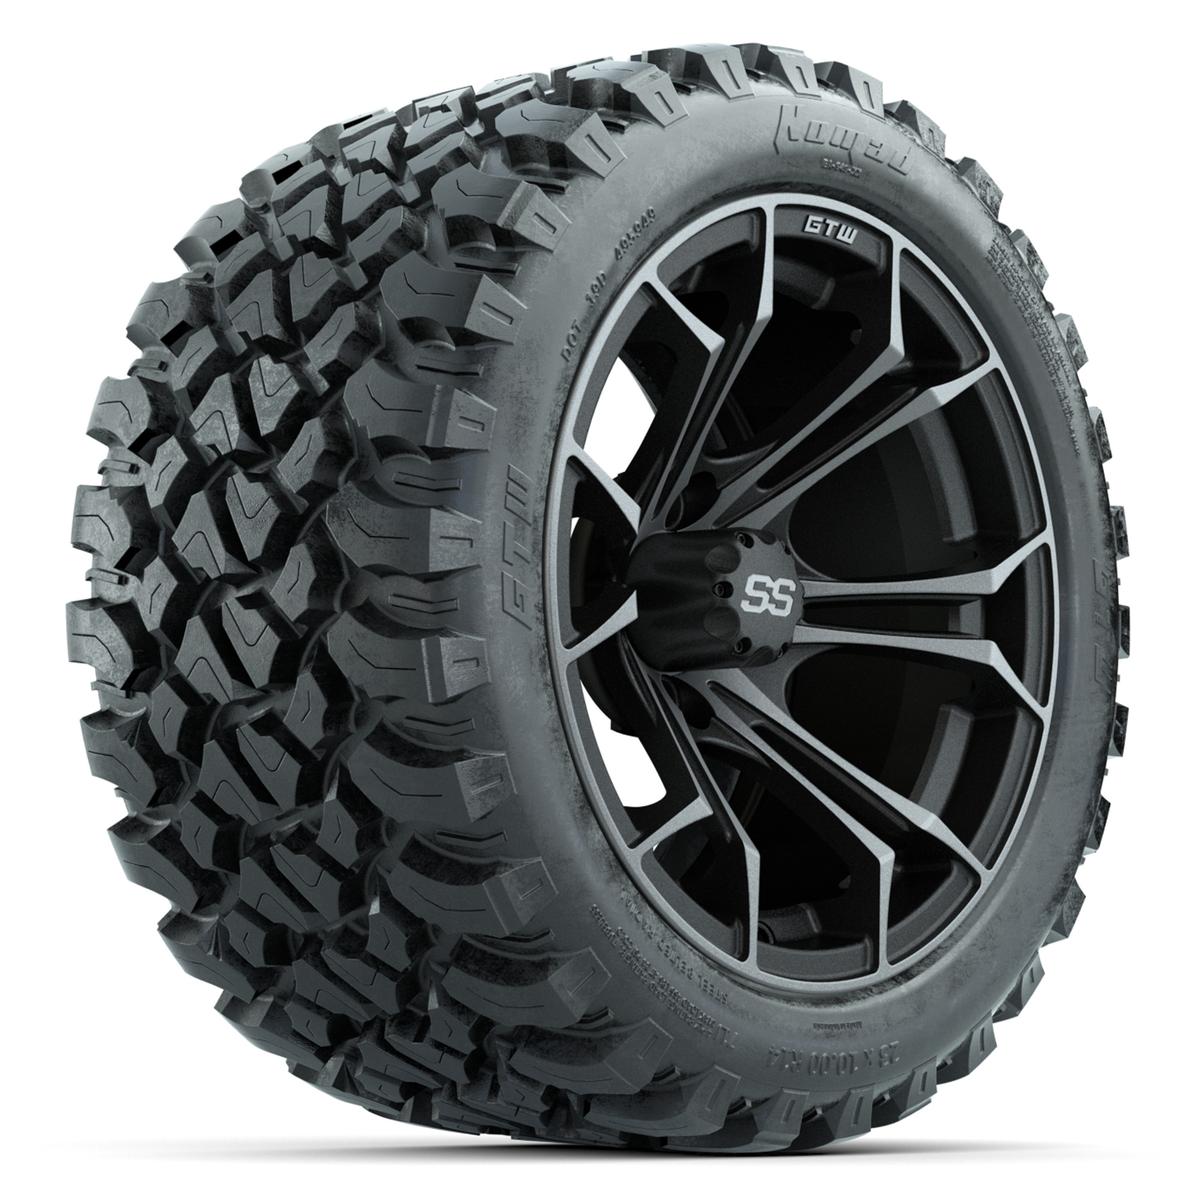 GTW Spyder Matte Grey 14 in Wheels with 23x10-14 GTW Nomad All-Terrain Tires – Full Set